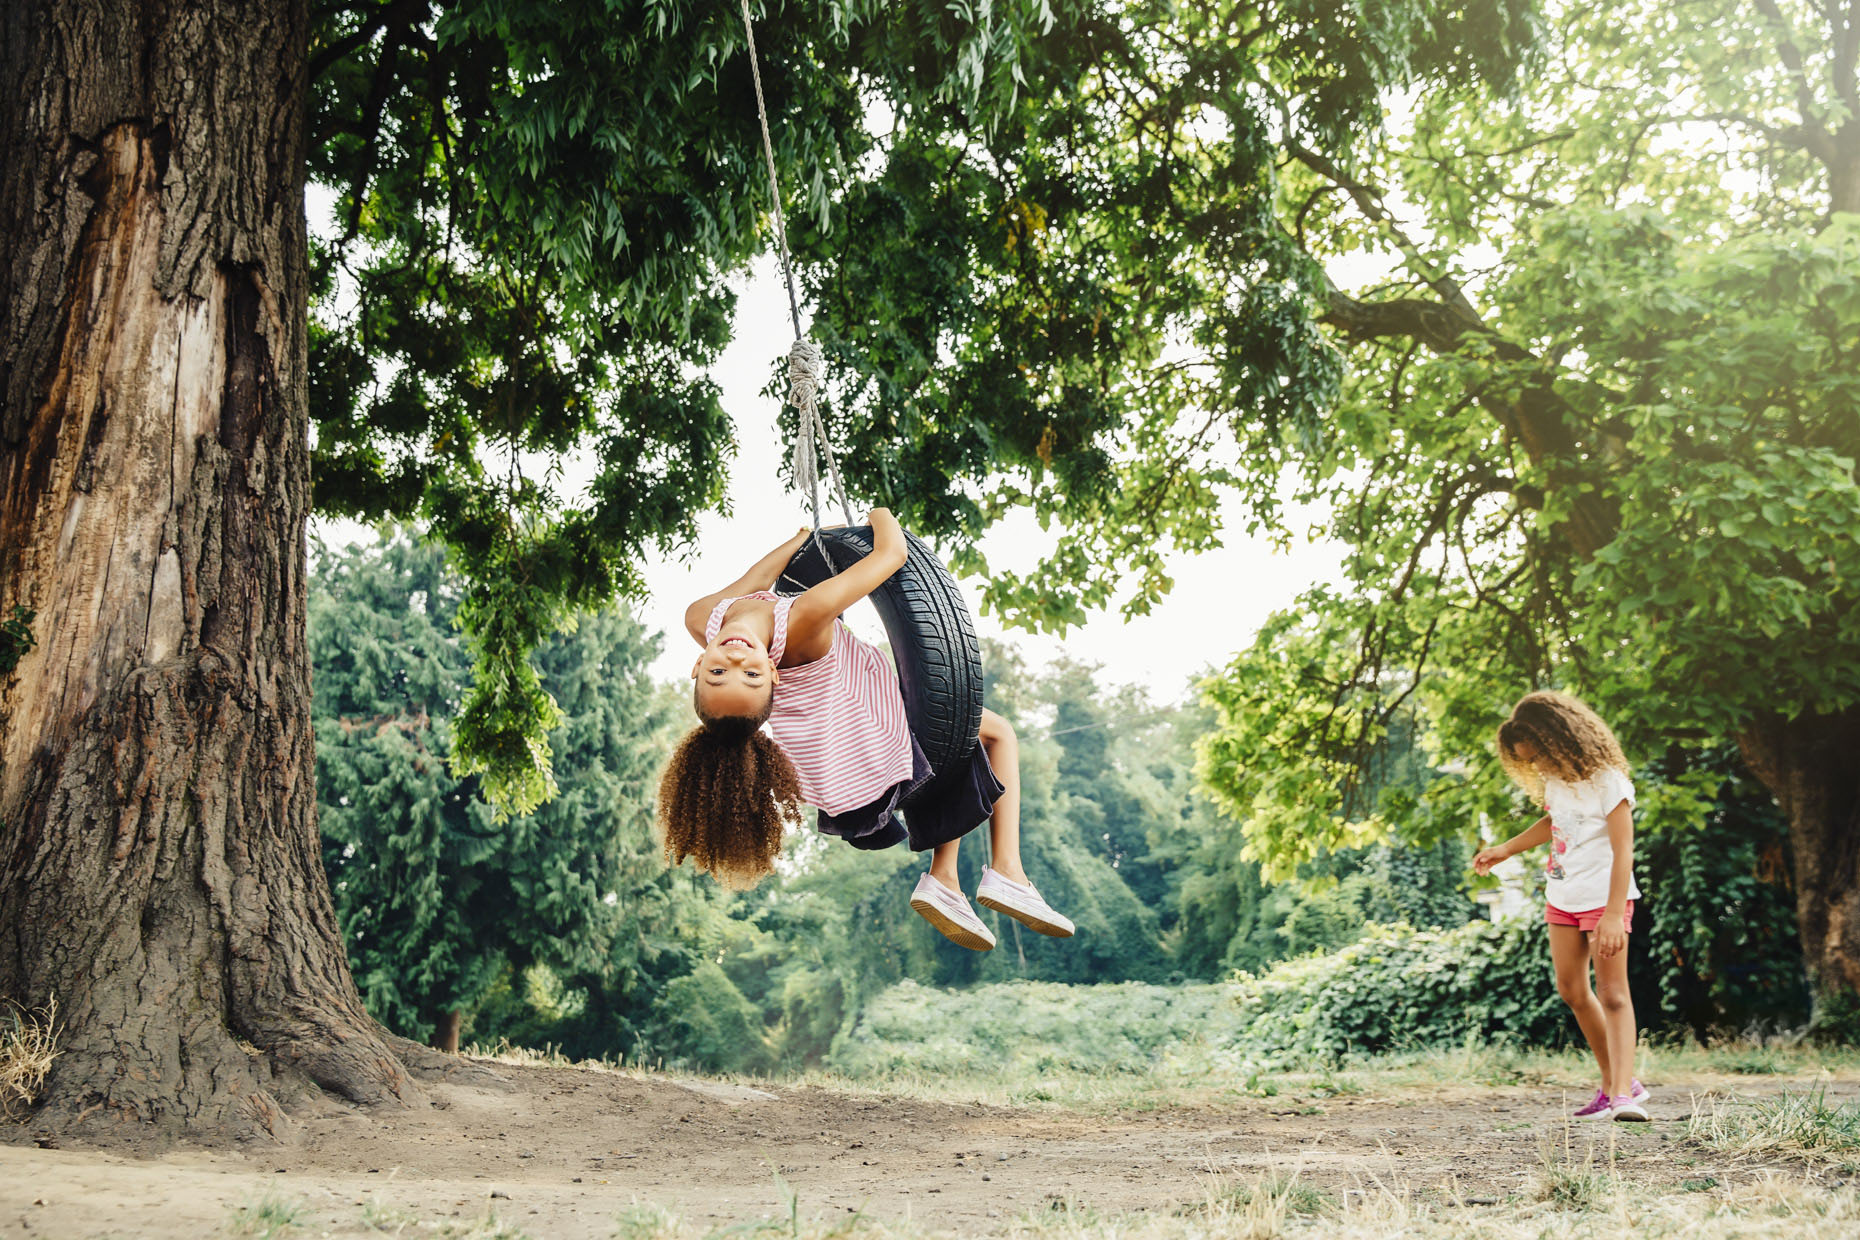 Girls playing on tire swing outside by big tree